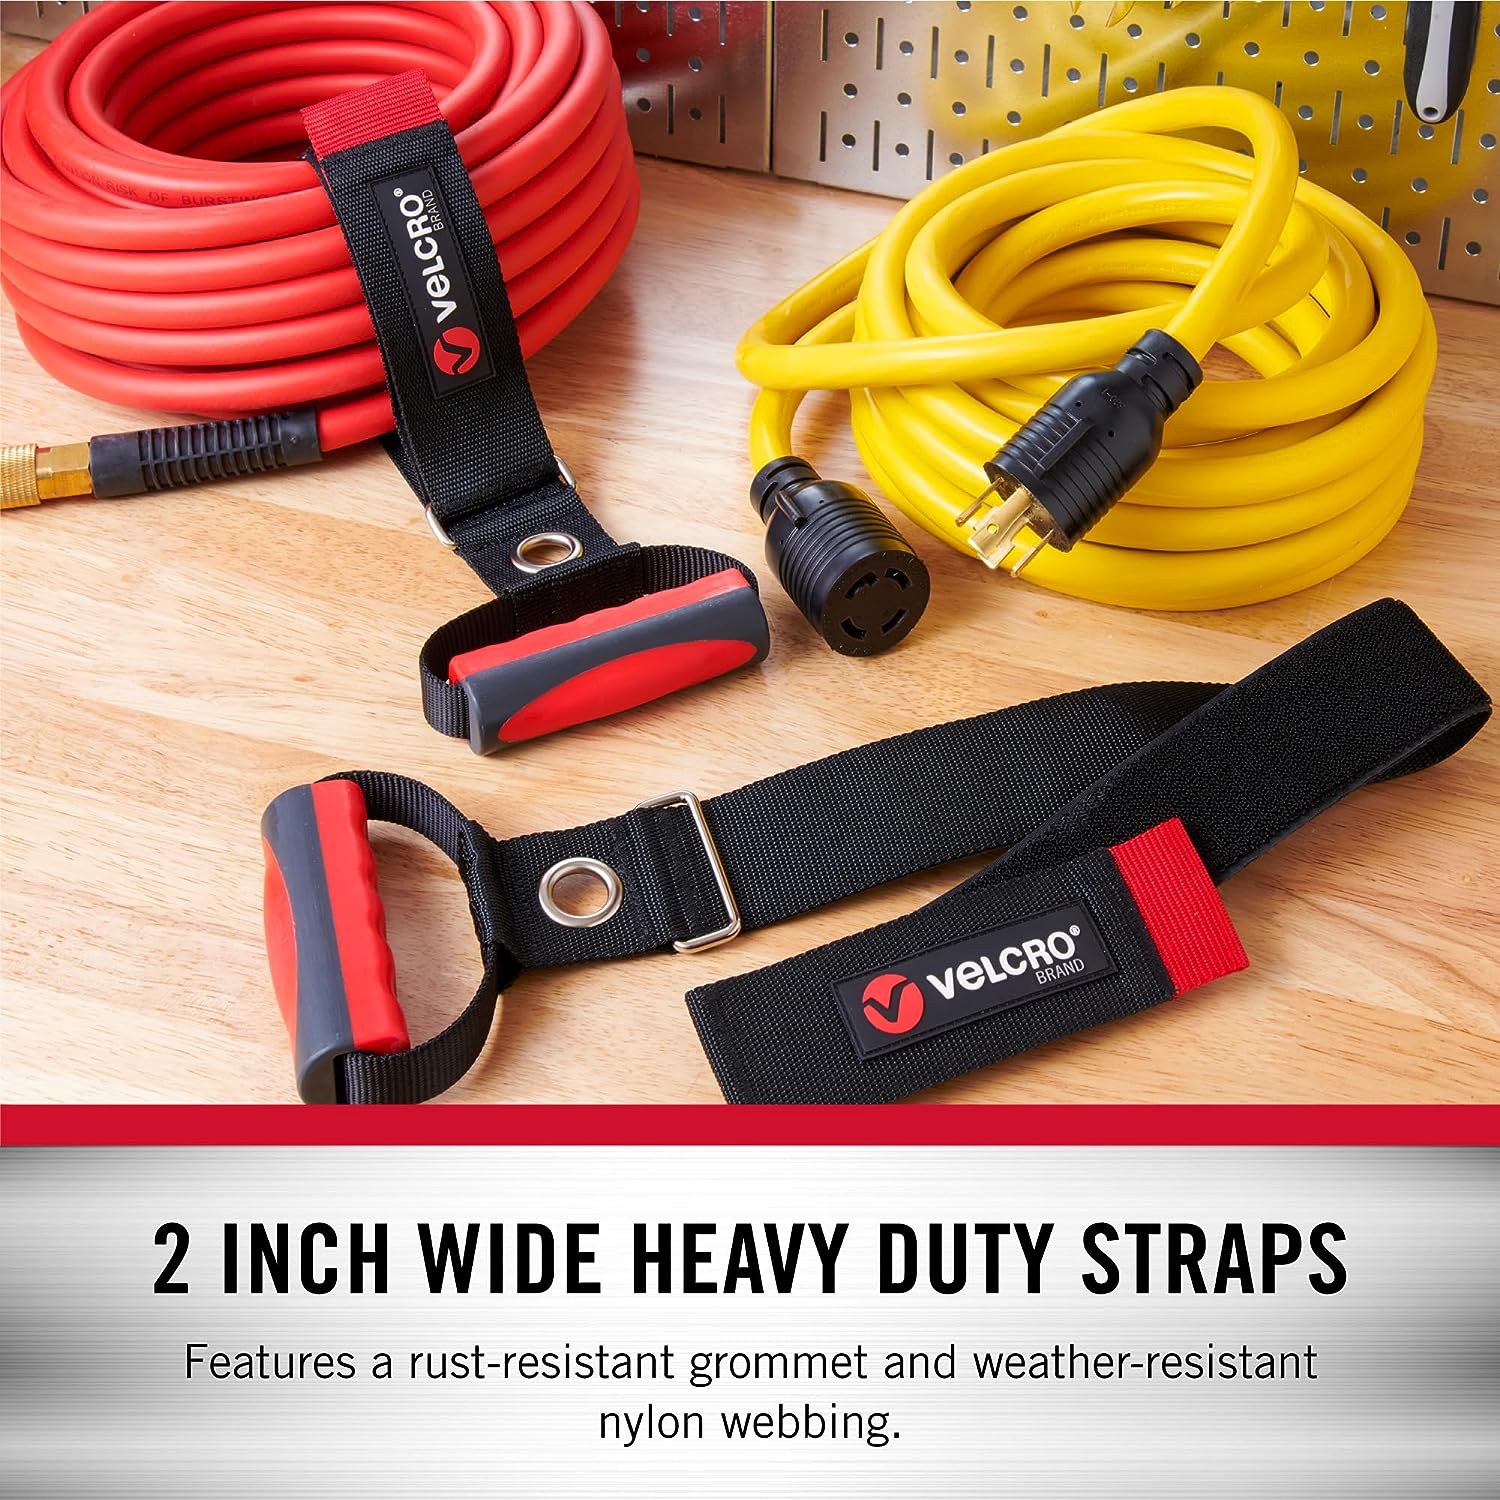 VELCRO® Brand EASY HANG™ Carry Storage Straps with Handle